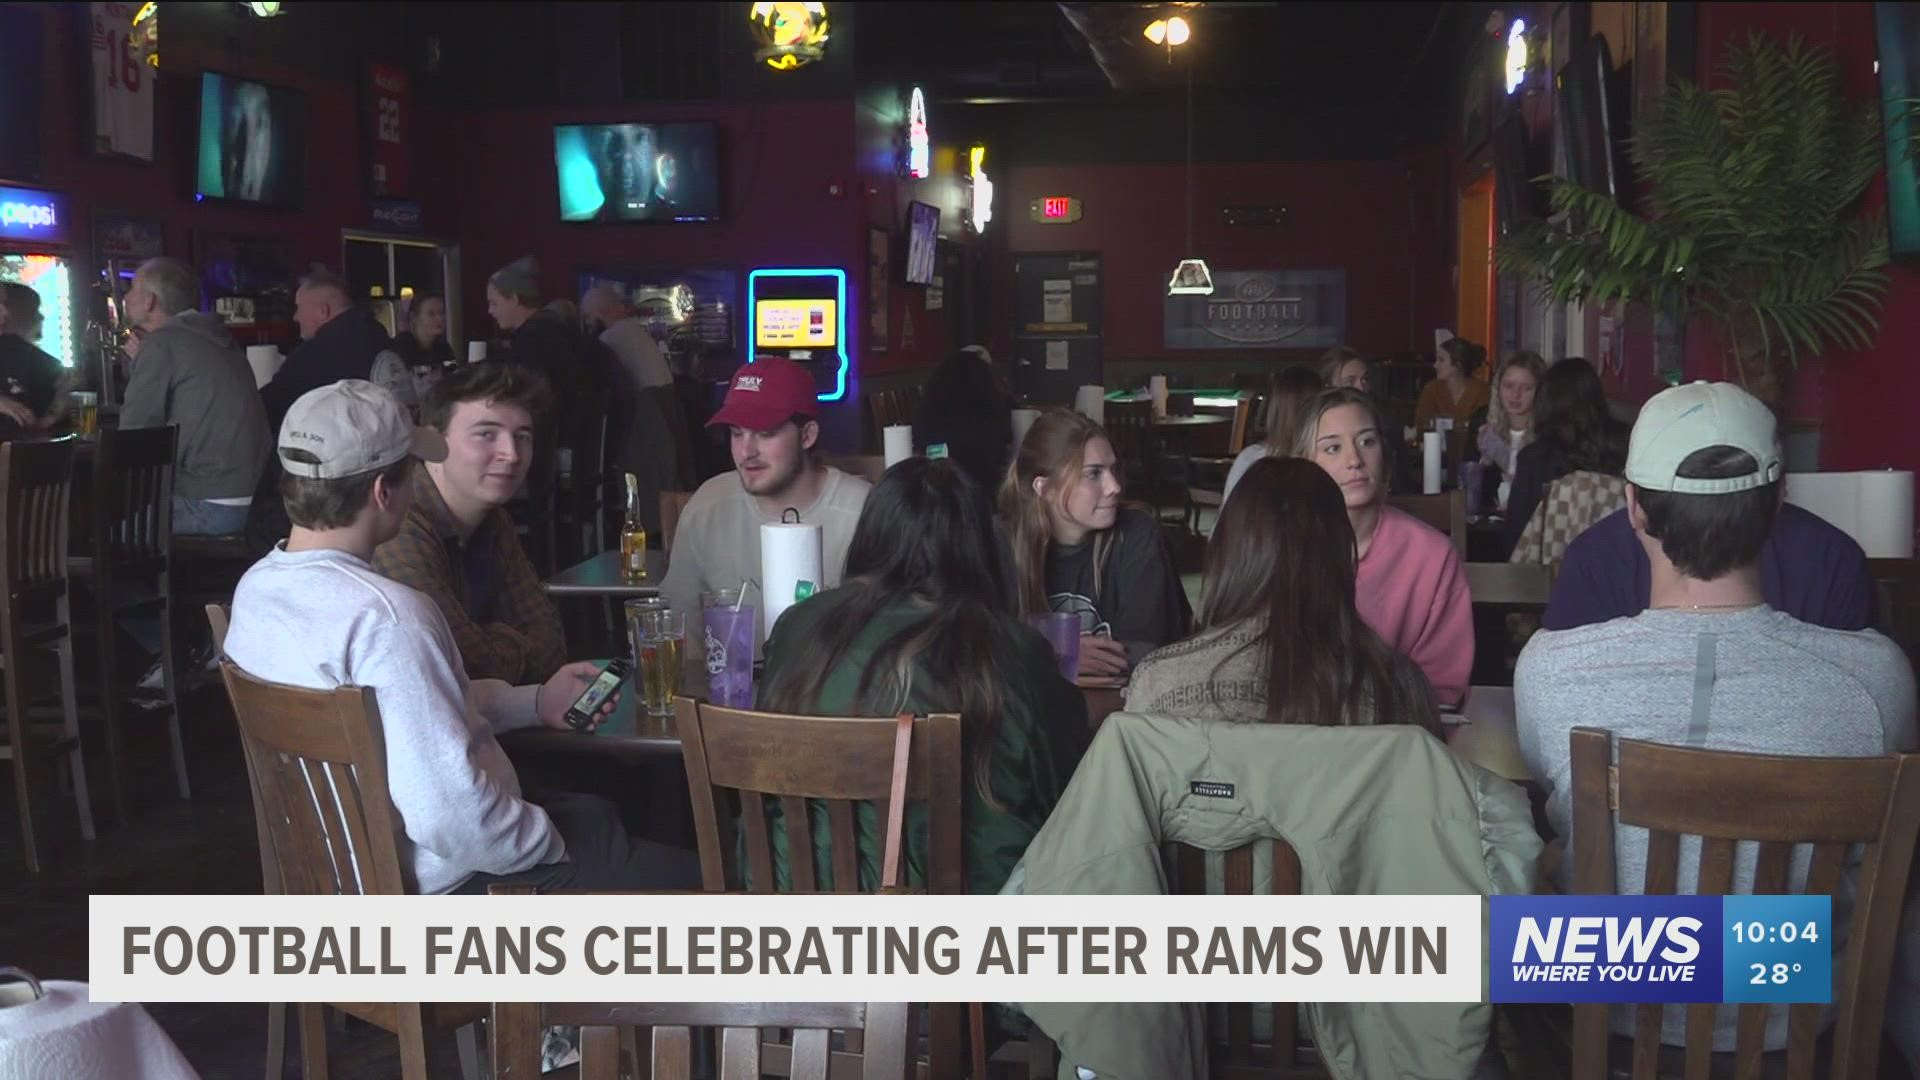 Local football fans celebrate after the Rams win the Super Bowl.